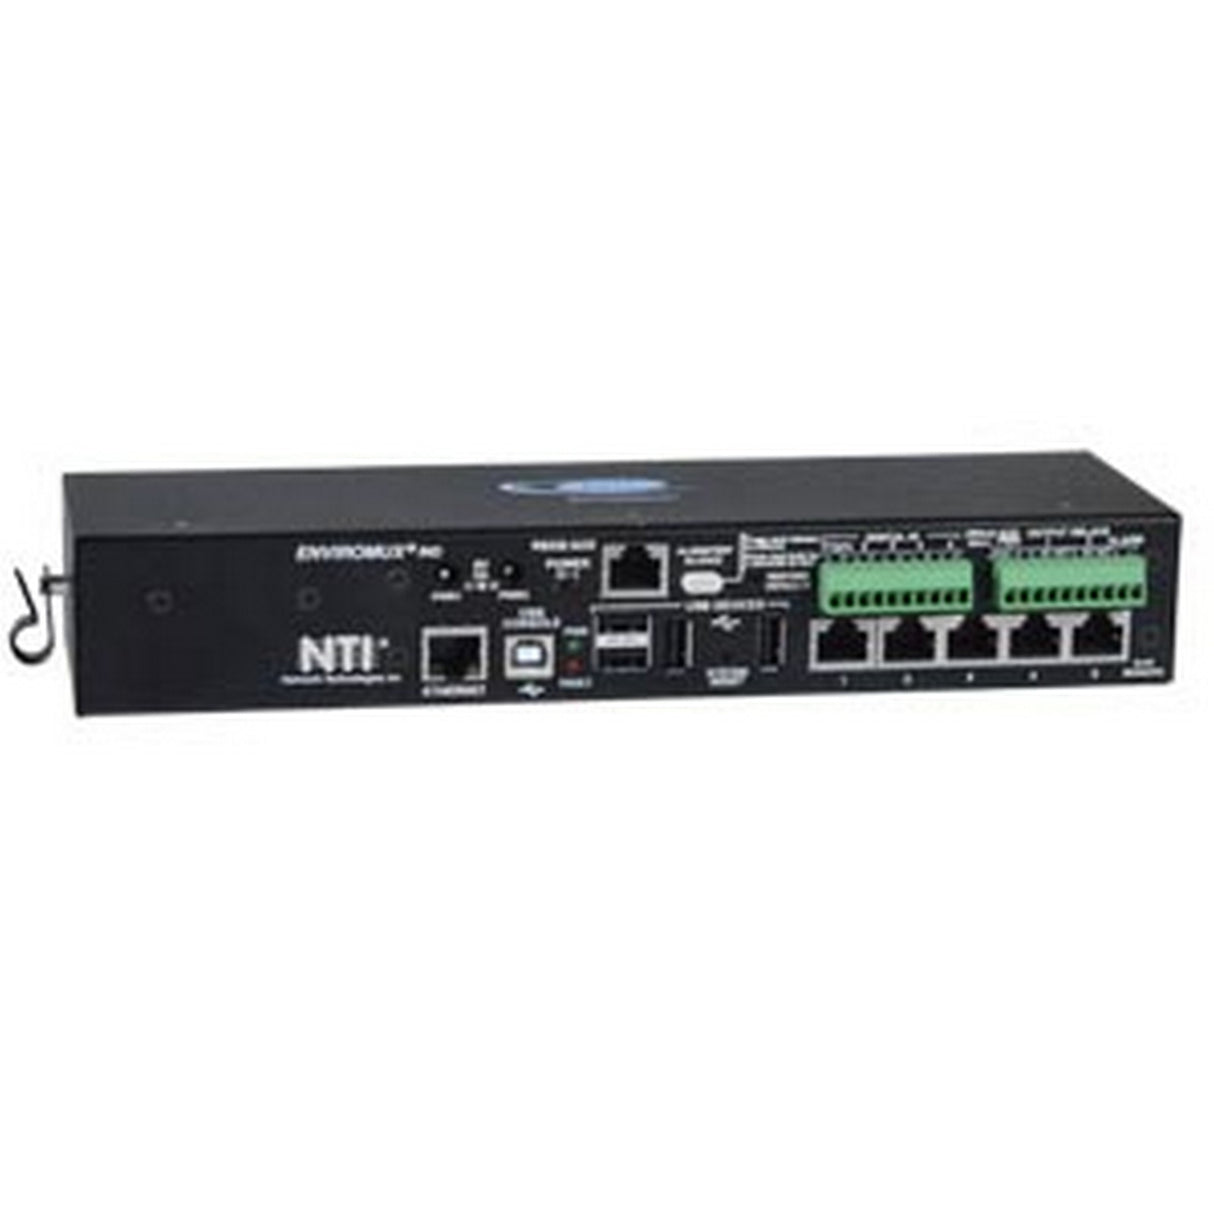 NTI E-5DB-IND Industrial Medium Enterprise Environment Monitoring System for High Temperature Environments, Back-up Battery